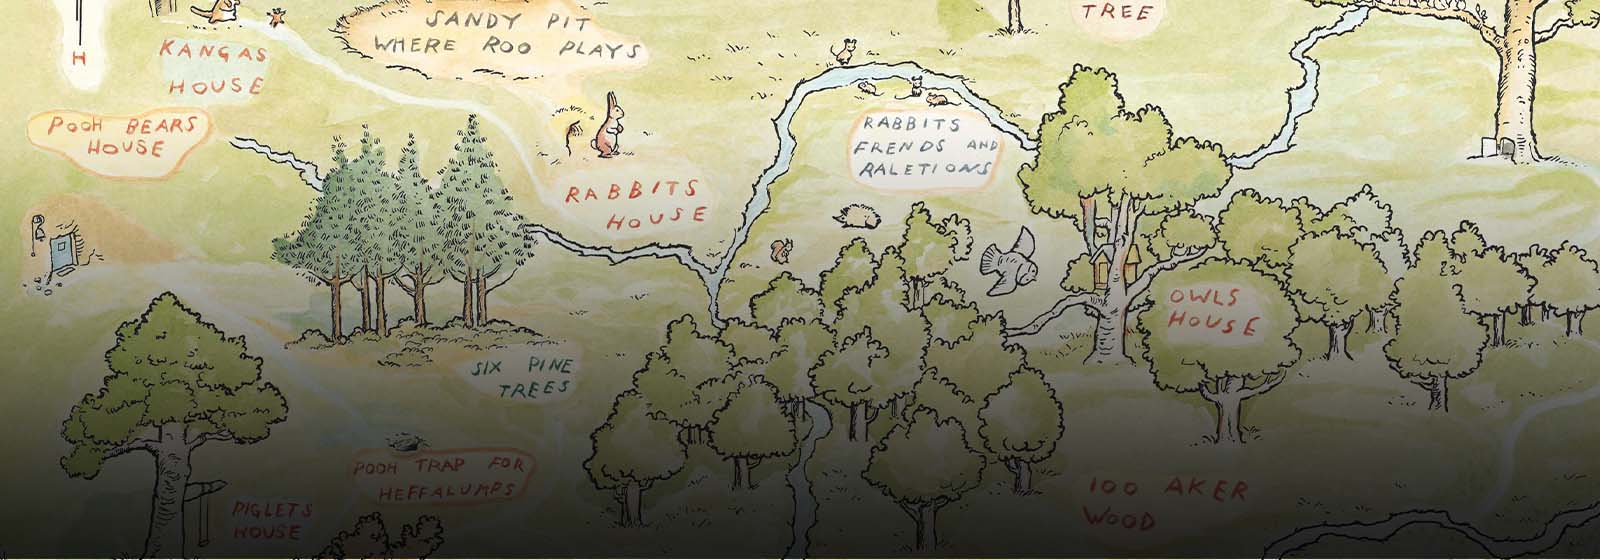 EXPLORE THE HUNDRED ACRE WOOD